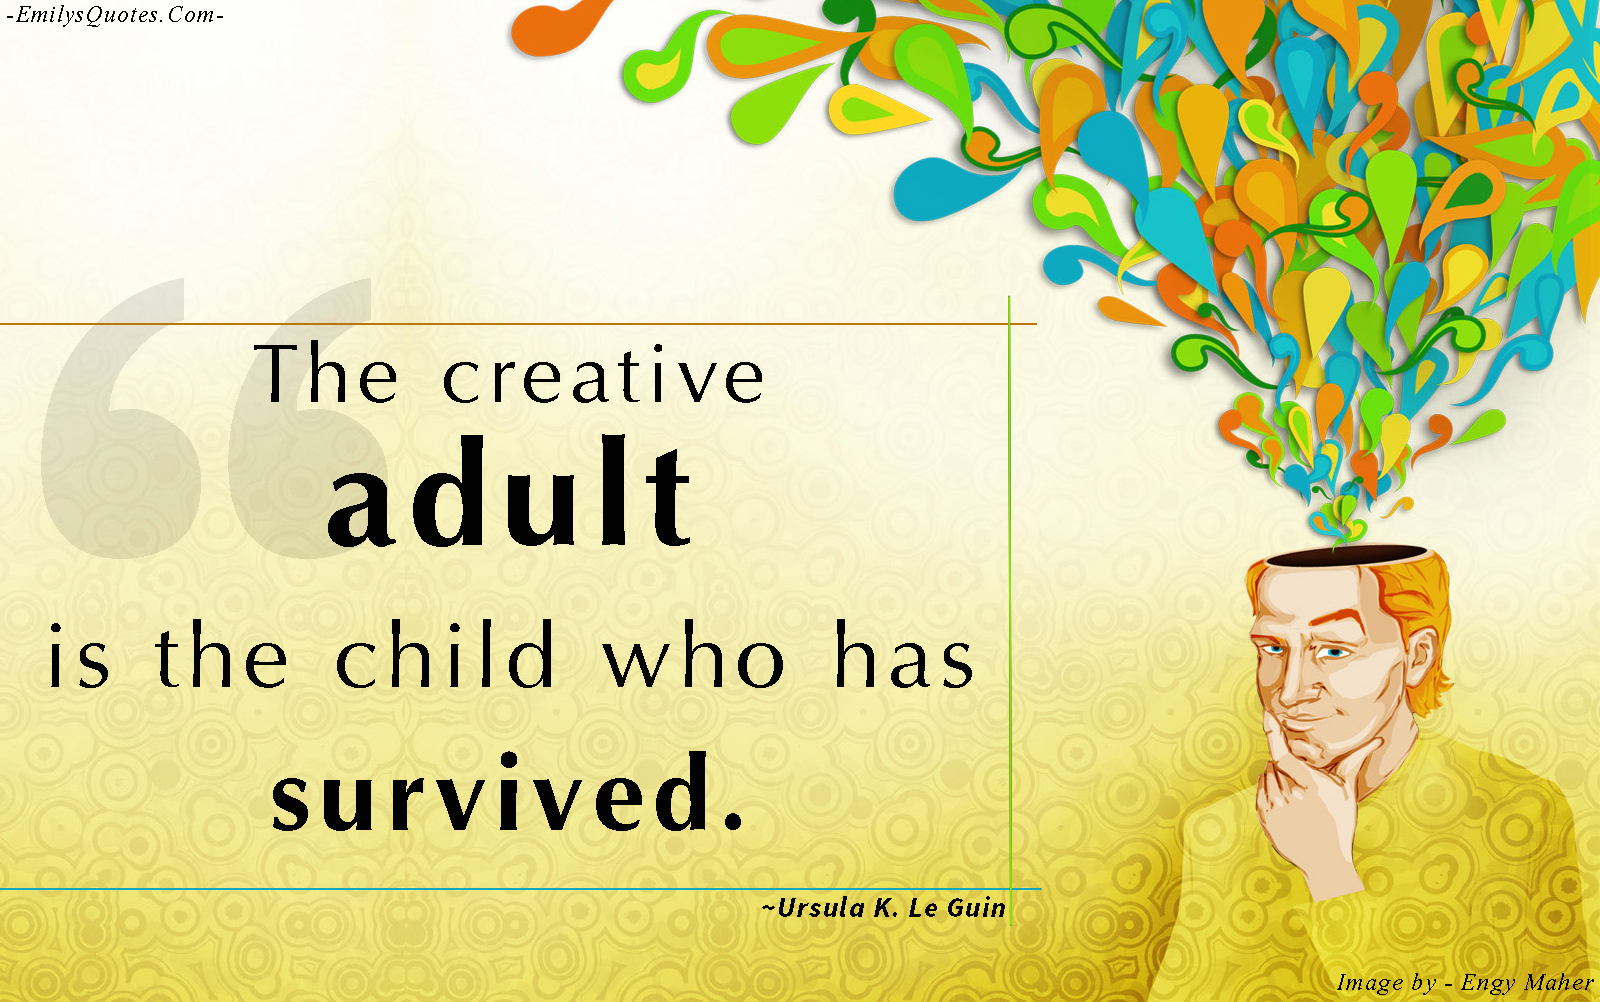 The creative adult is the child who has survived